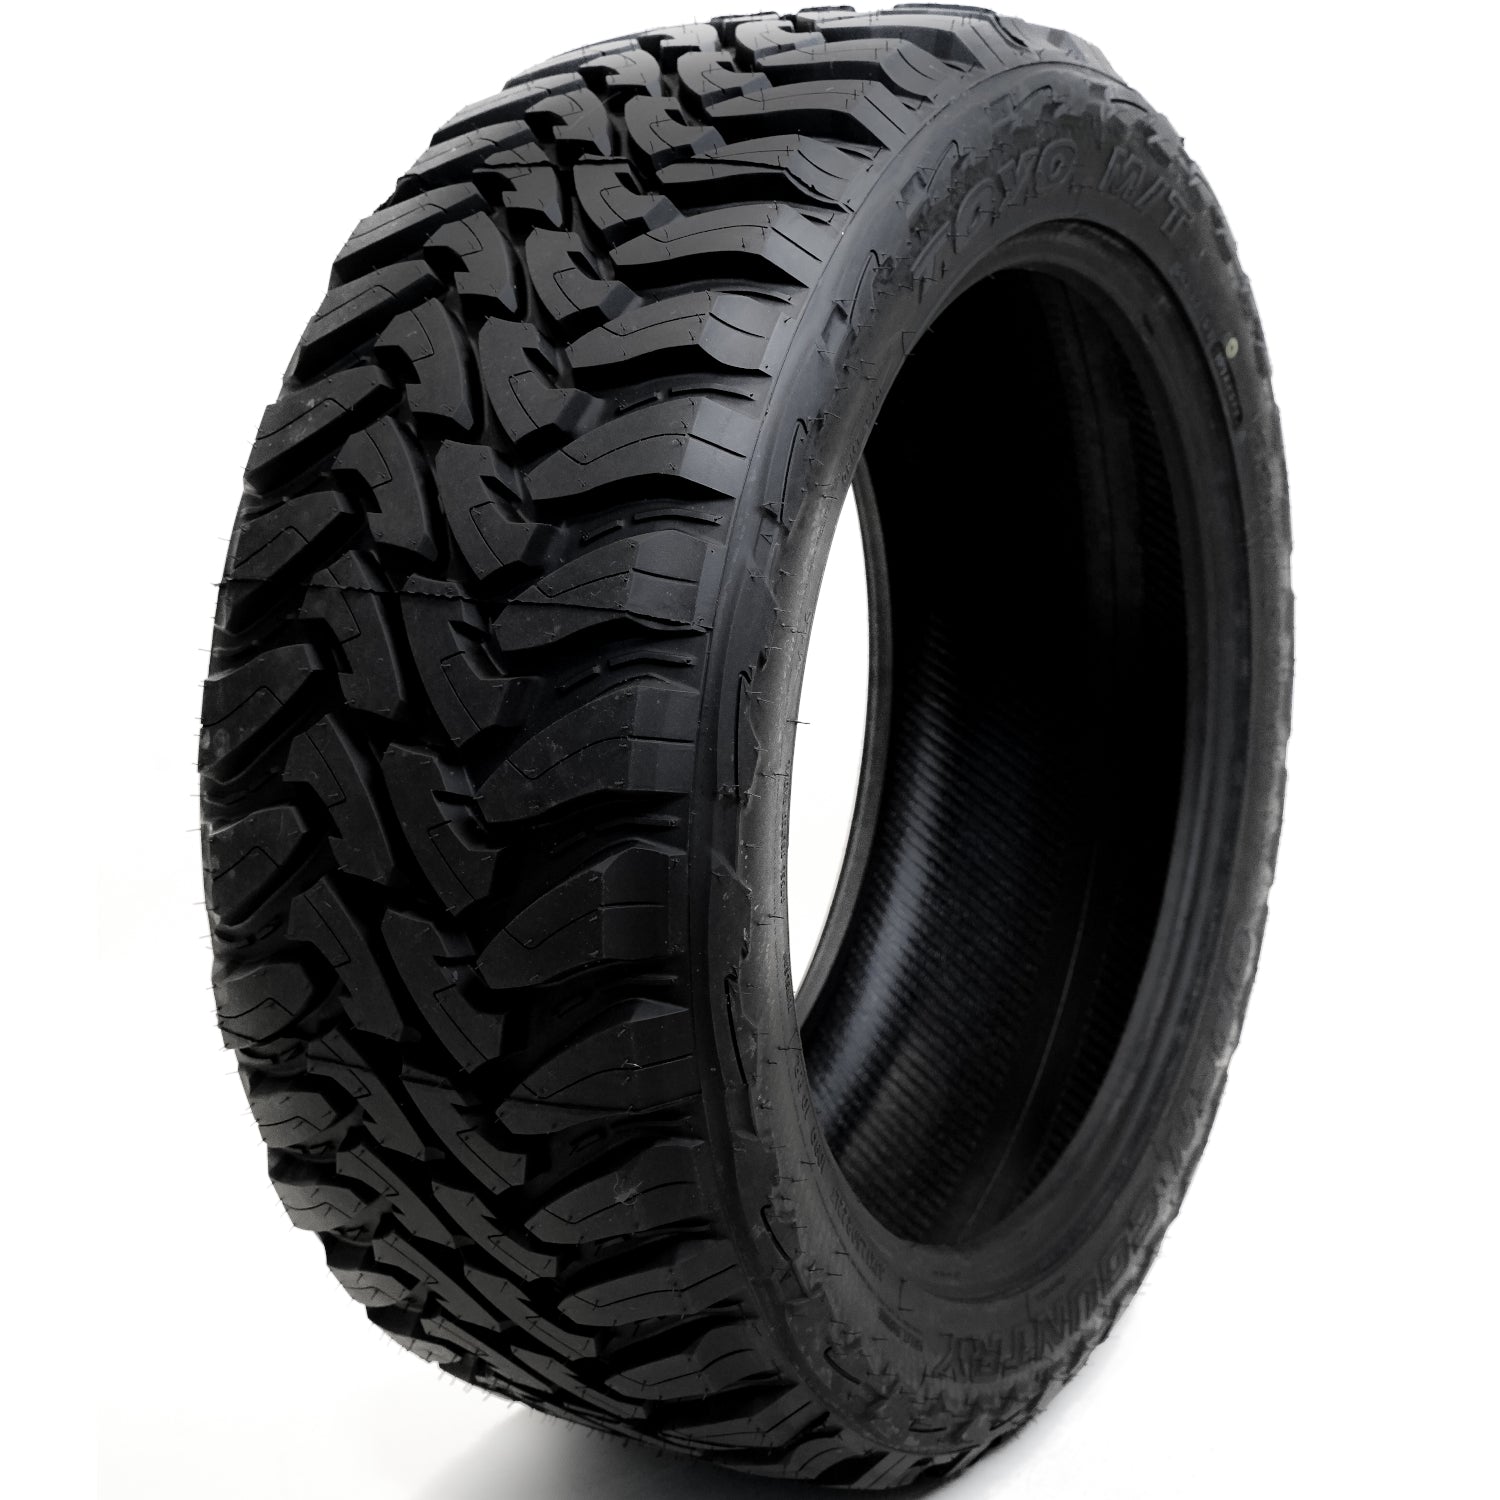 TOYO TIRES OPEN COUNTRY M/T 33X10.50R15LT Tires